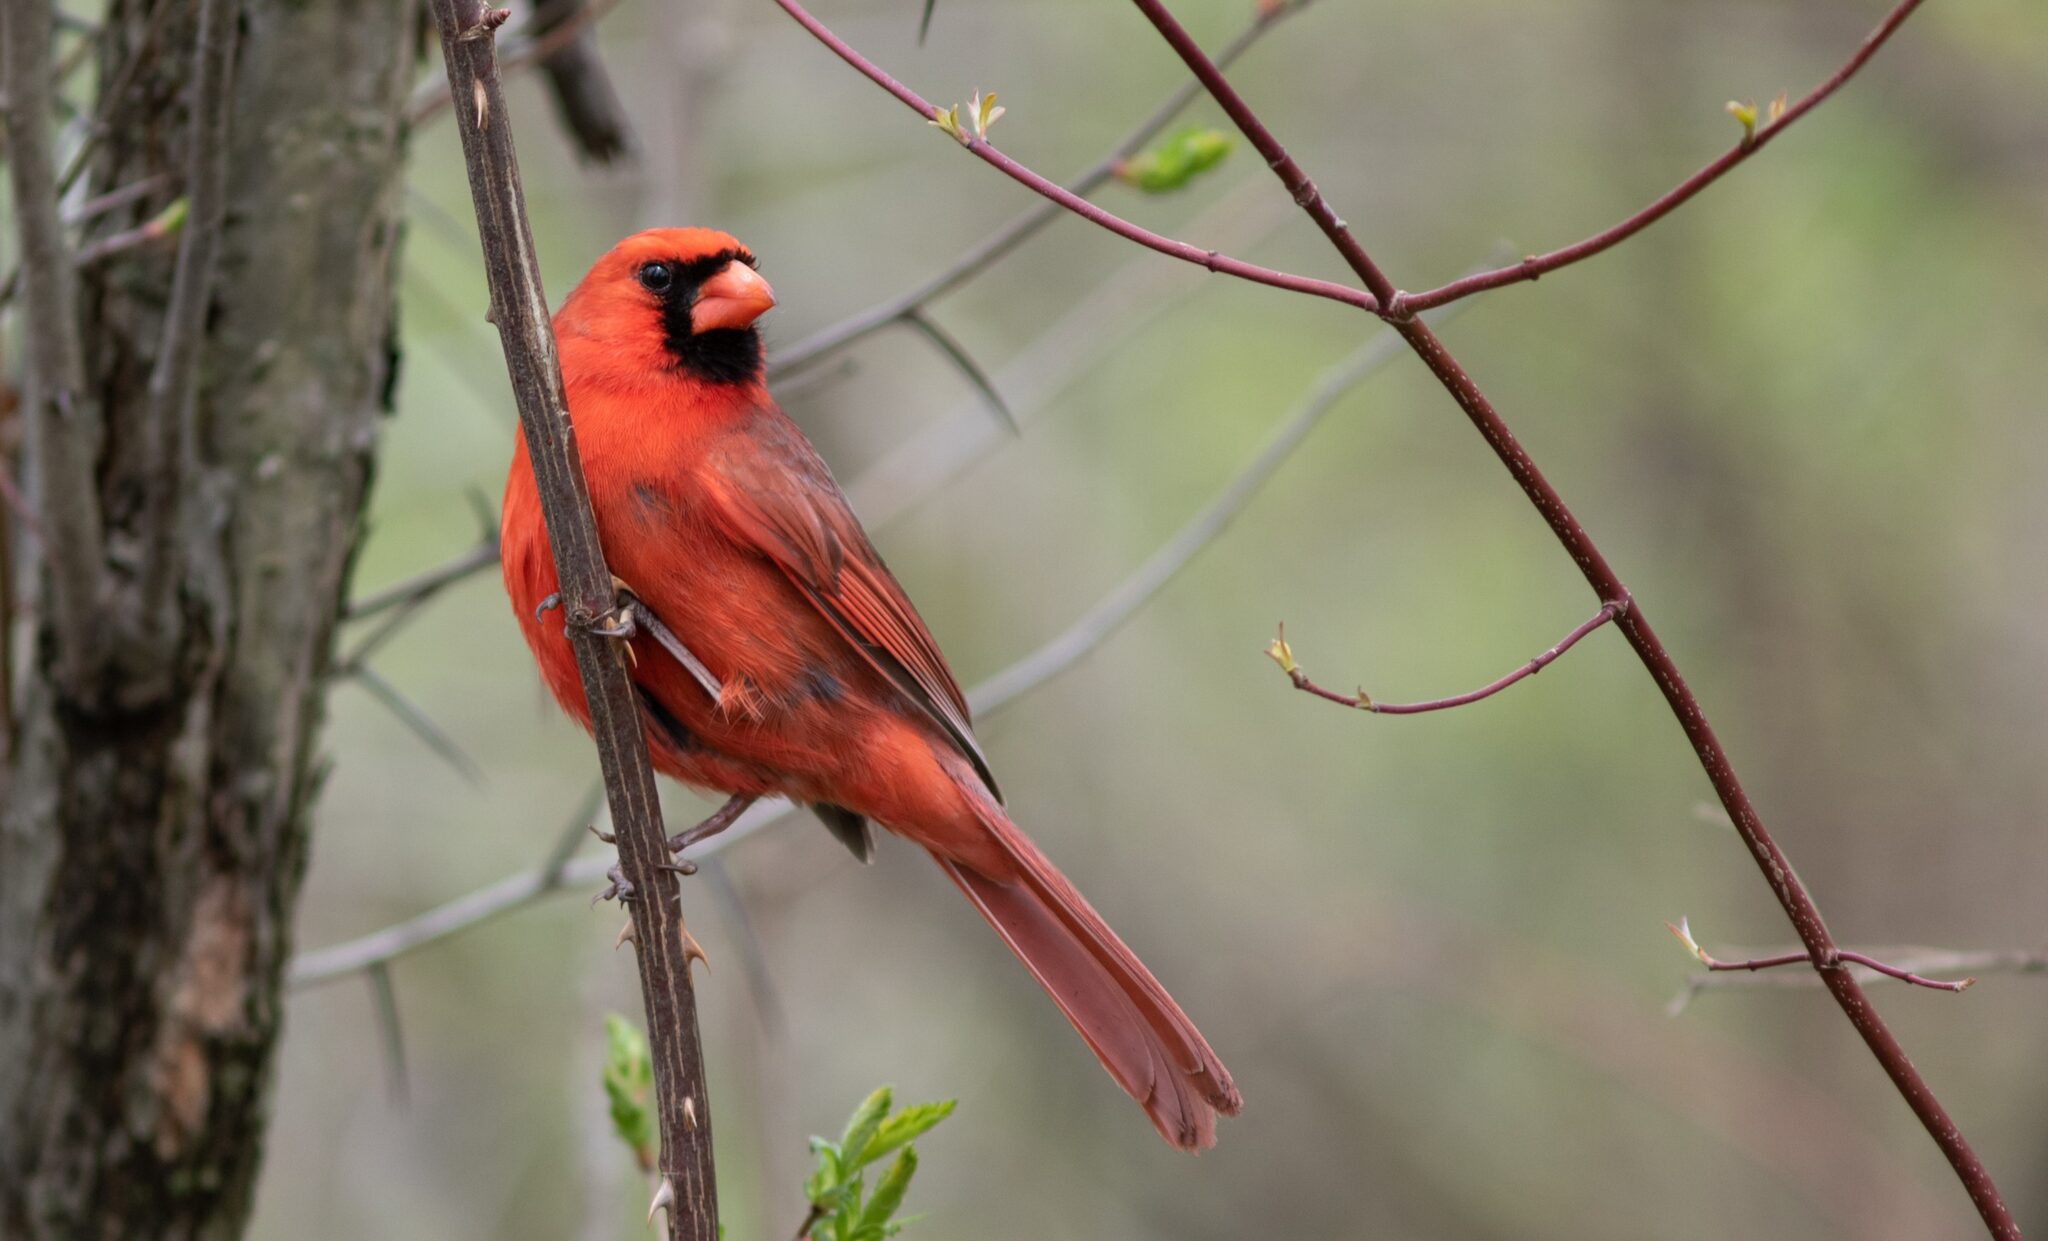 A northern cardinal sits on tree branch.